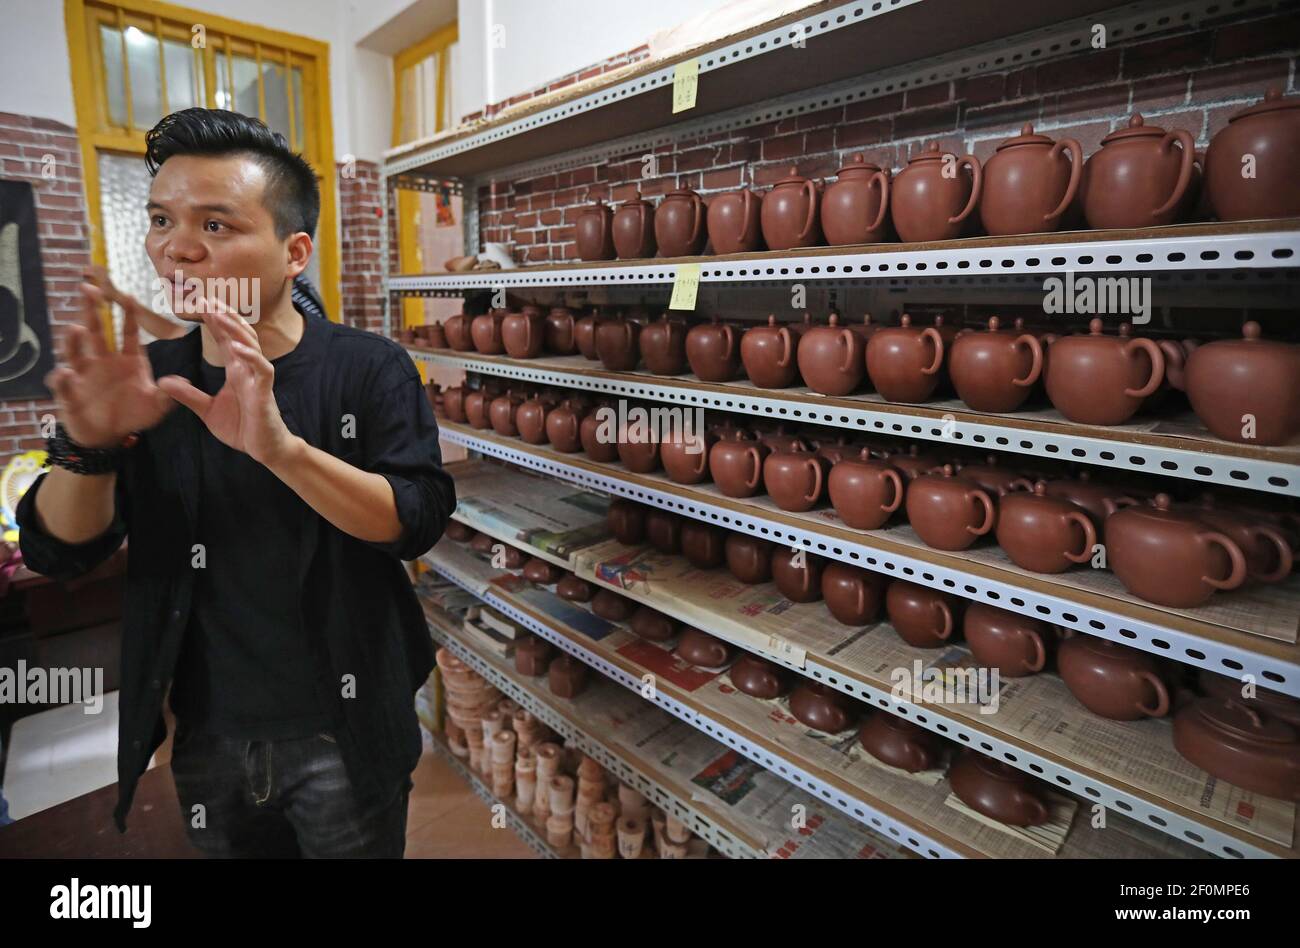 Chinese man Tang Tianyuan introduces Nixing pottery at his workshop in Wuzhou city, south China's Guangxi Zhuang autonomous region, 20 May 2019. If turning a habit into a career is a very fortunate thing, then you can call Tang Tianyuan from Guangxi Zhuang autonomous region a lucky dog, as he succeeded in not only building a business based on a passion but also working side by side with his schoolmates. Tang, born in the 1990s, has been playing with mud since he was a child, and later majored in ceramics and decorative sculpture design at college. While busy shuttling between classes, the stud Stock Photo